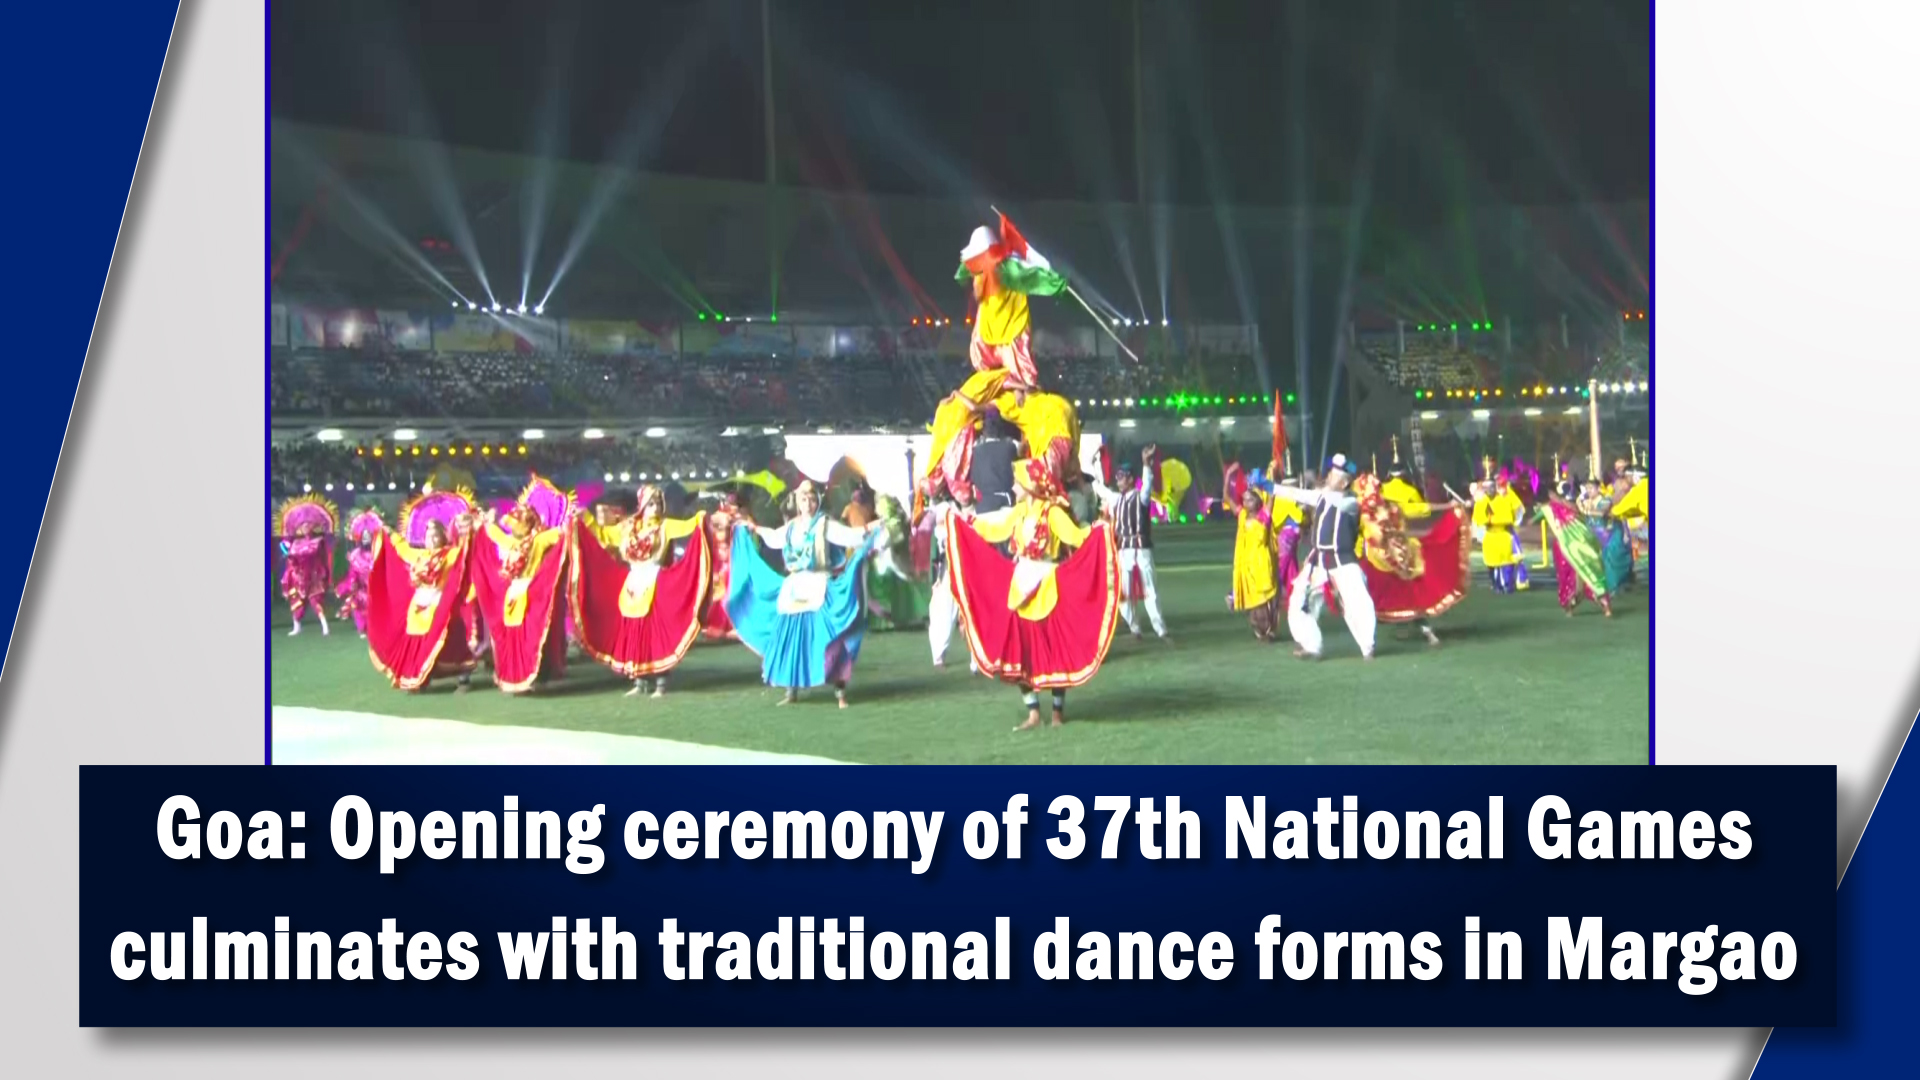 Goa: Opening ceremony of 37th National Games culminates with traditional dance forms in Margao